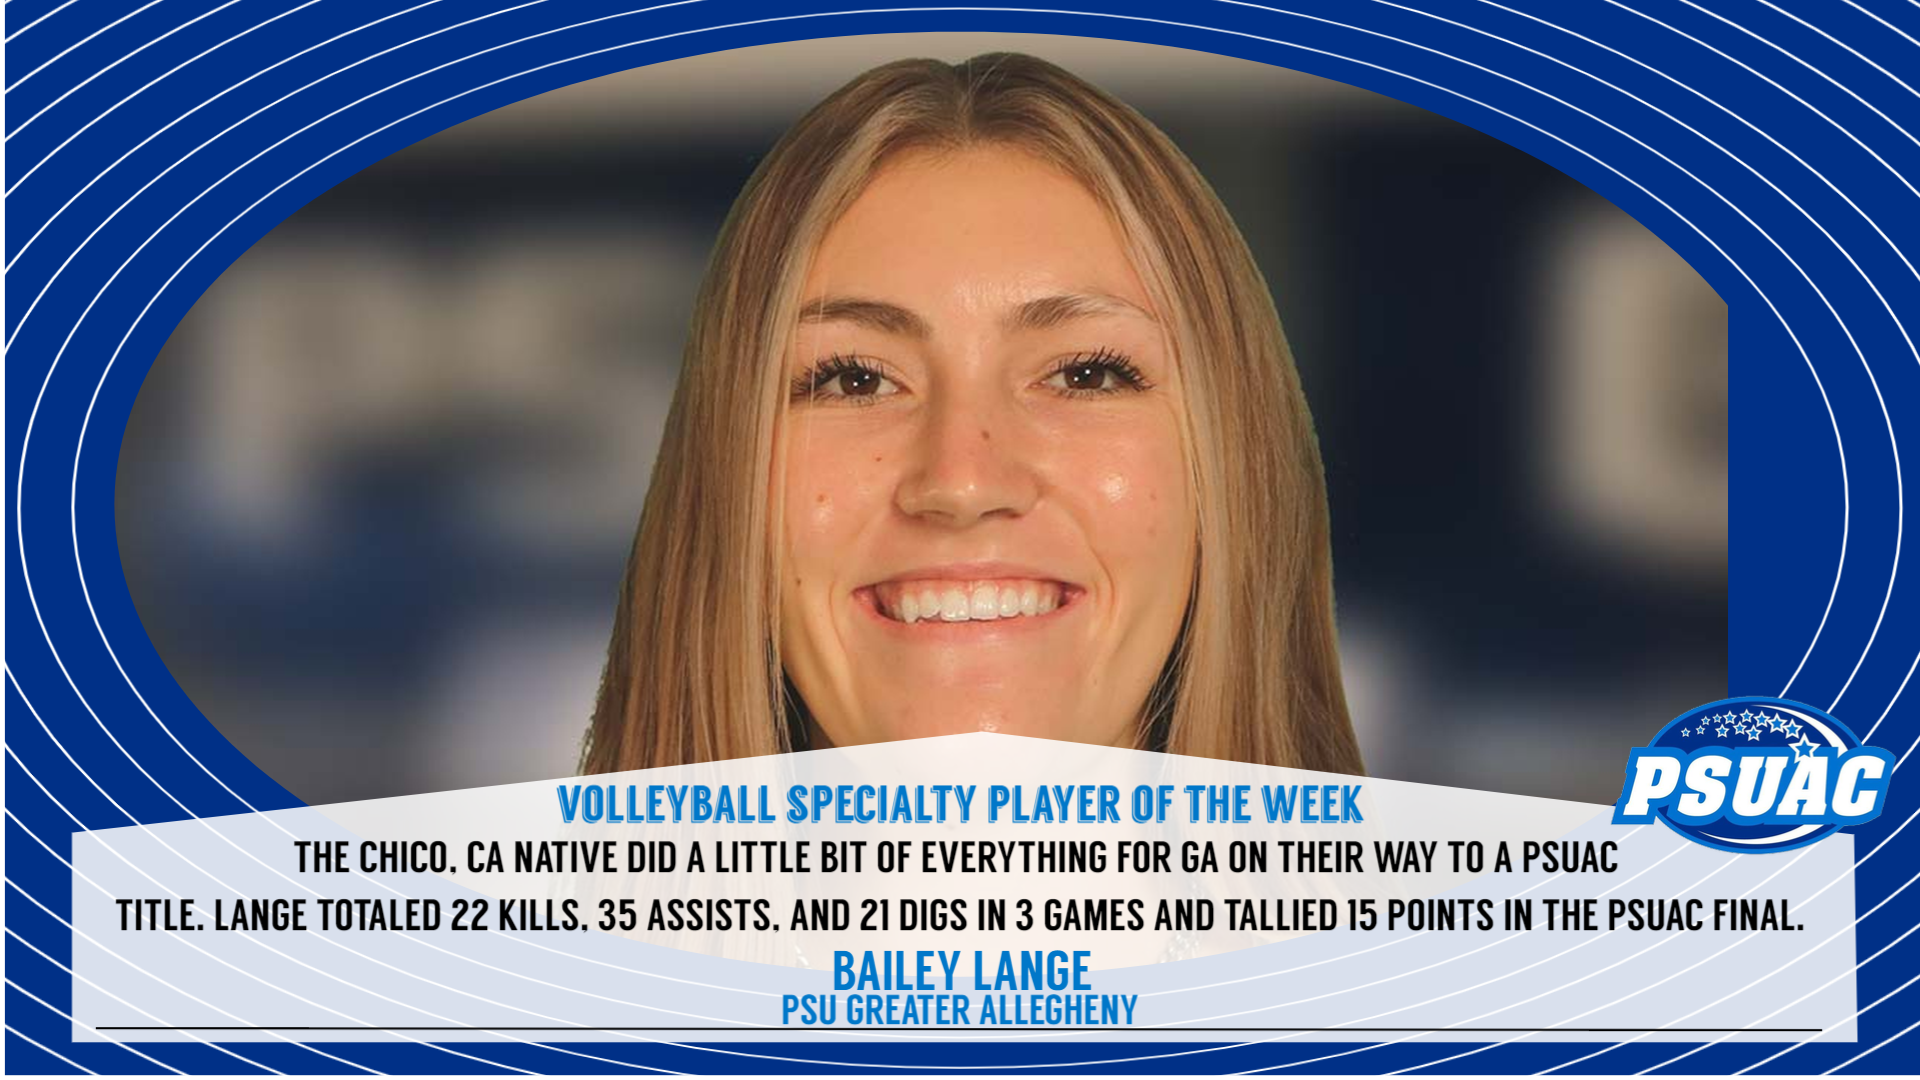 Penn State Greater Allegheny's Bailey Lange.